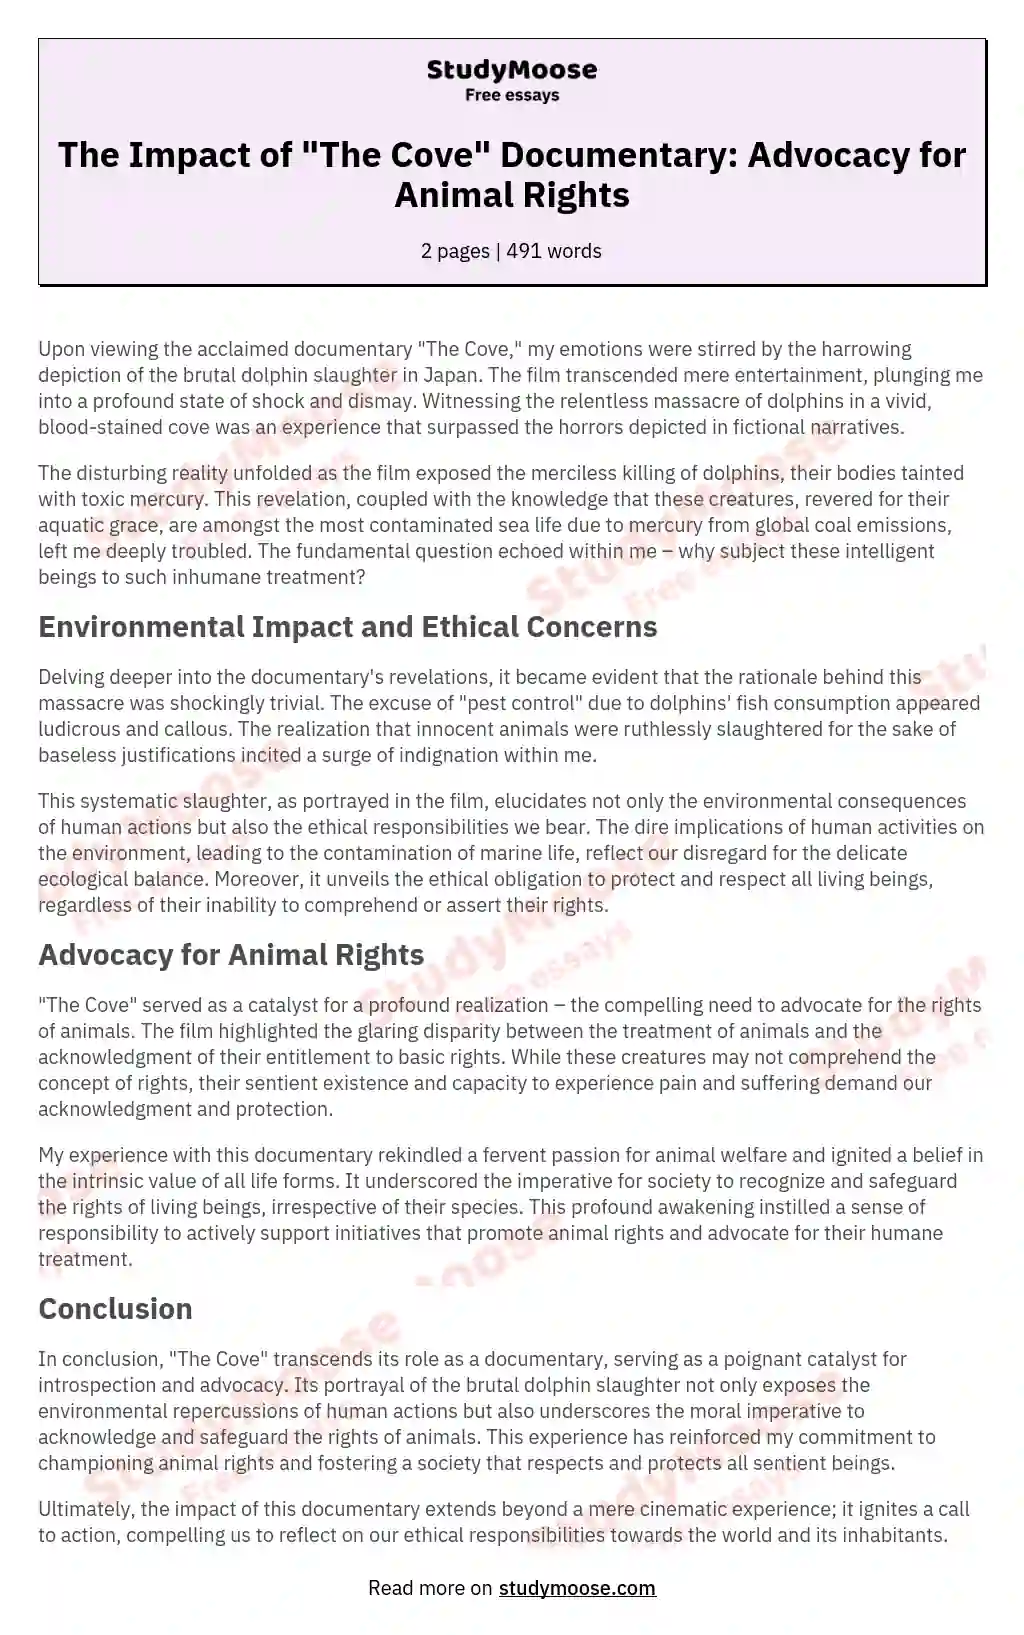 The Impact of "The Cove" Documentary: Advocacy for Animal Rights essay